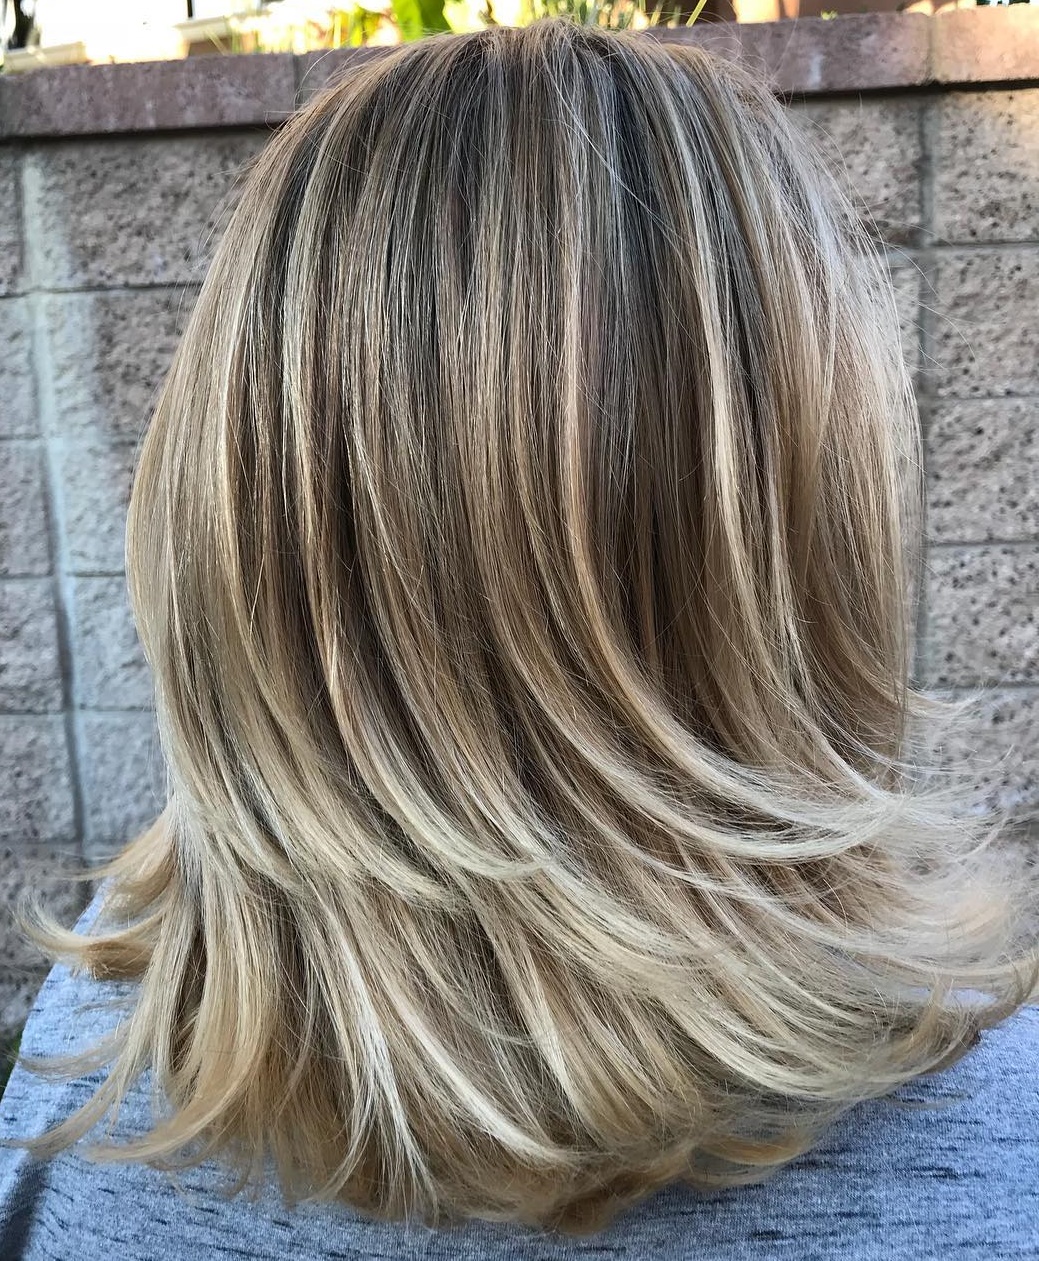 Two-Layer Medium Bronde Hairstyle